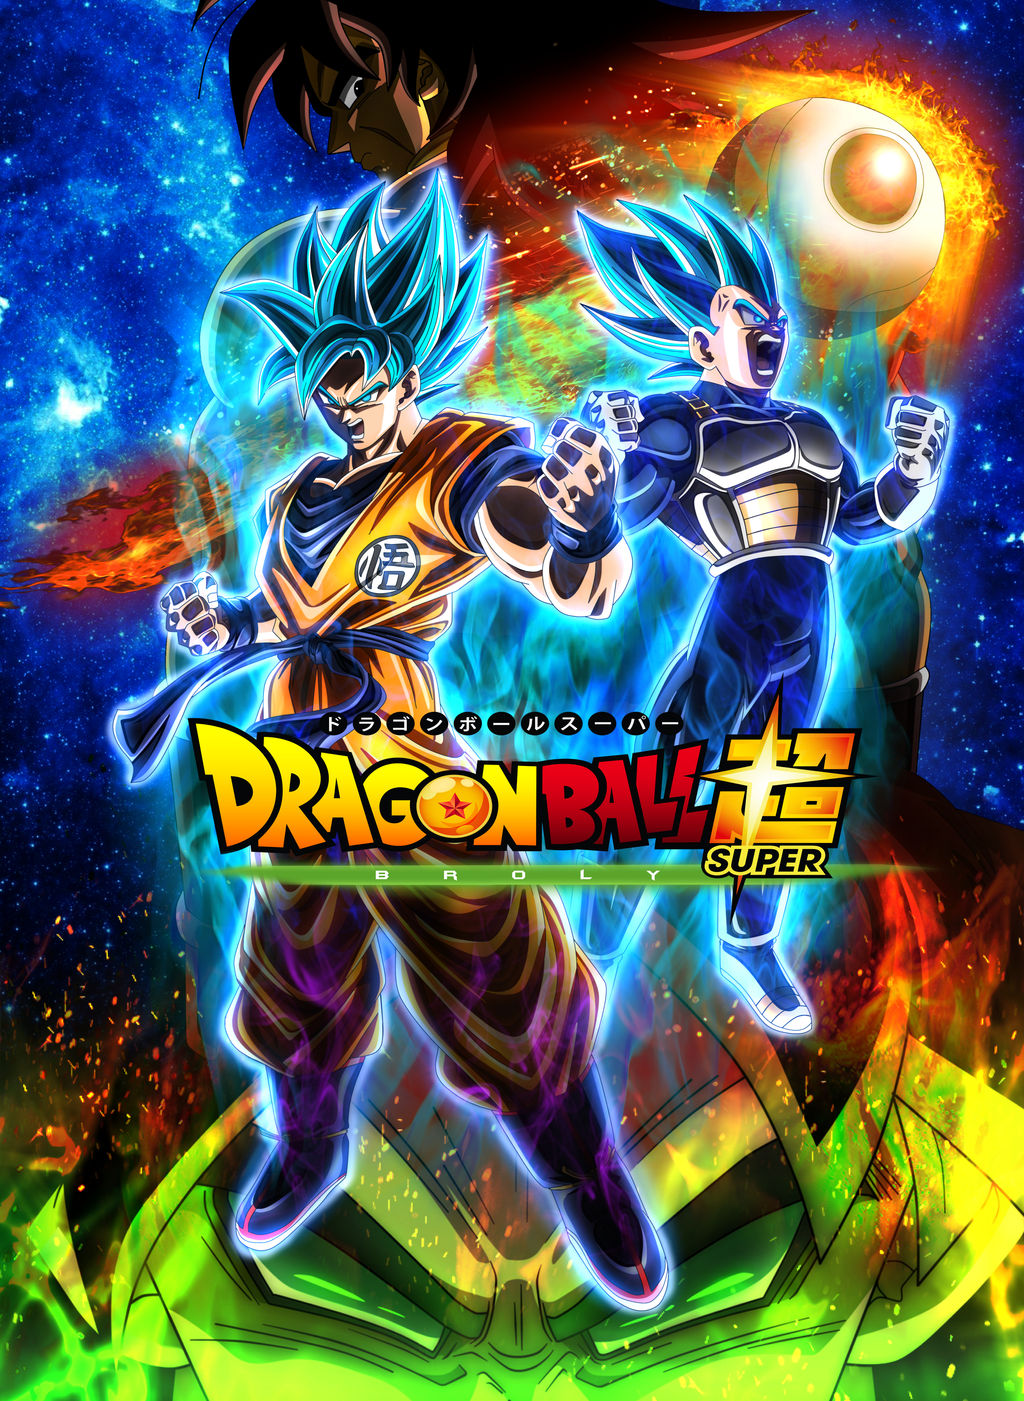 Dragon Ball Super Movie 2018 Poster Ramake by lucario strike on